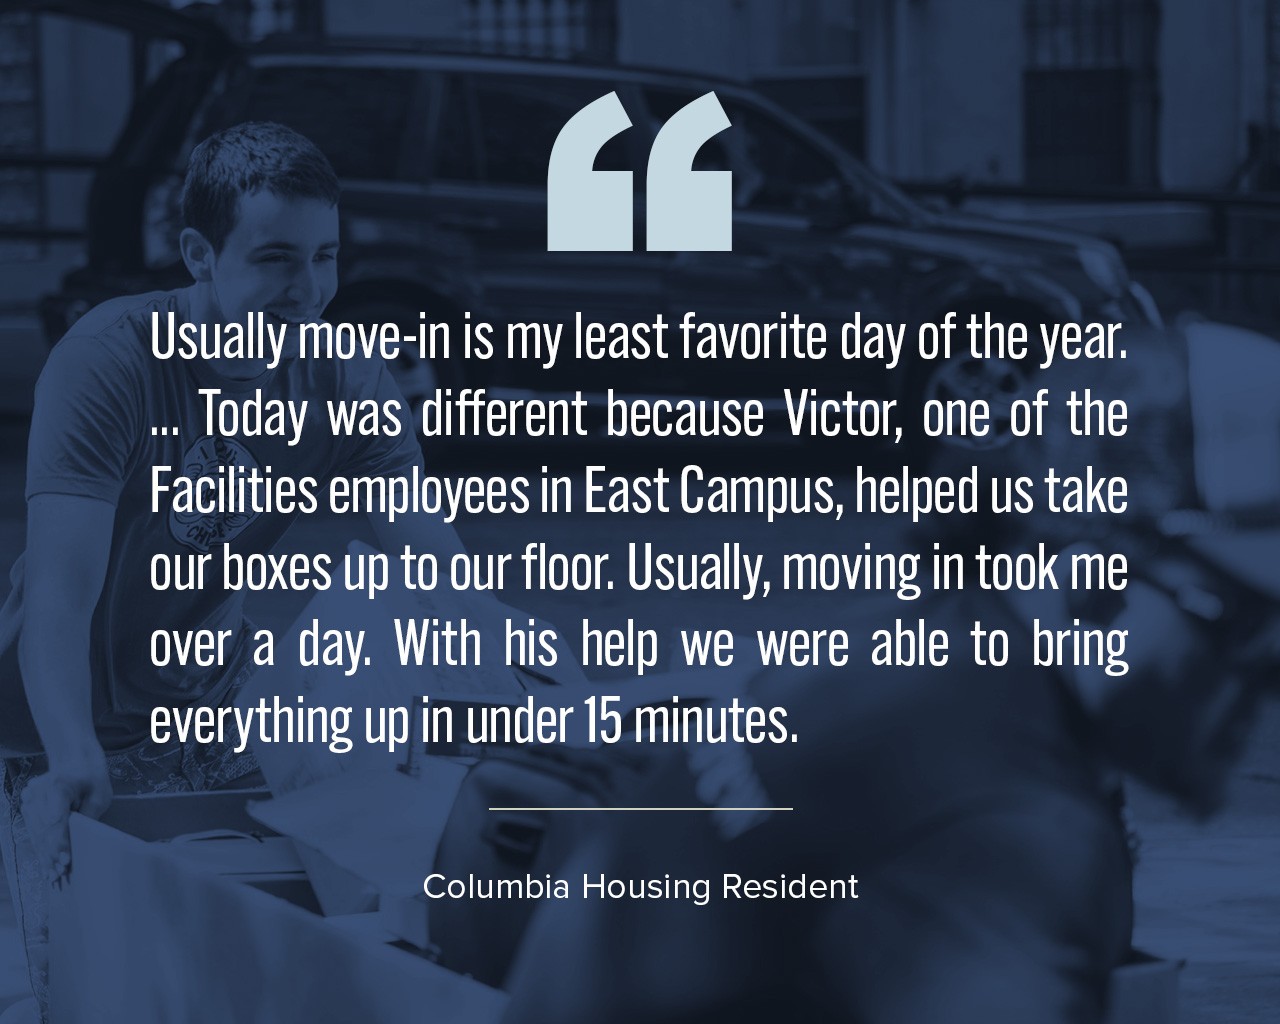 A quote that says, "Usually move-in is my least favorite day of the year. ... Today was different because Victor, one of the Facilities employees in East Campus, helped us take our boxes up to our floor. Usually, moving in took me over a day. With his help we were able to bring everything up in under 15 minutes."